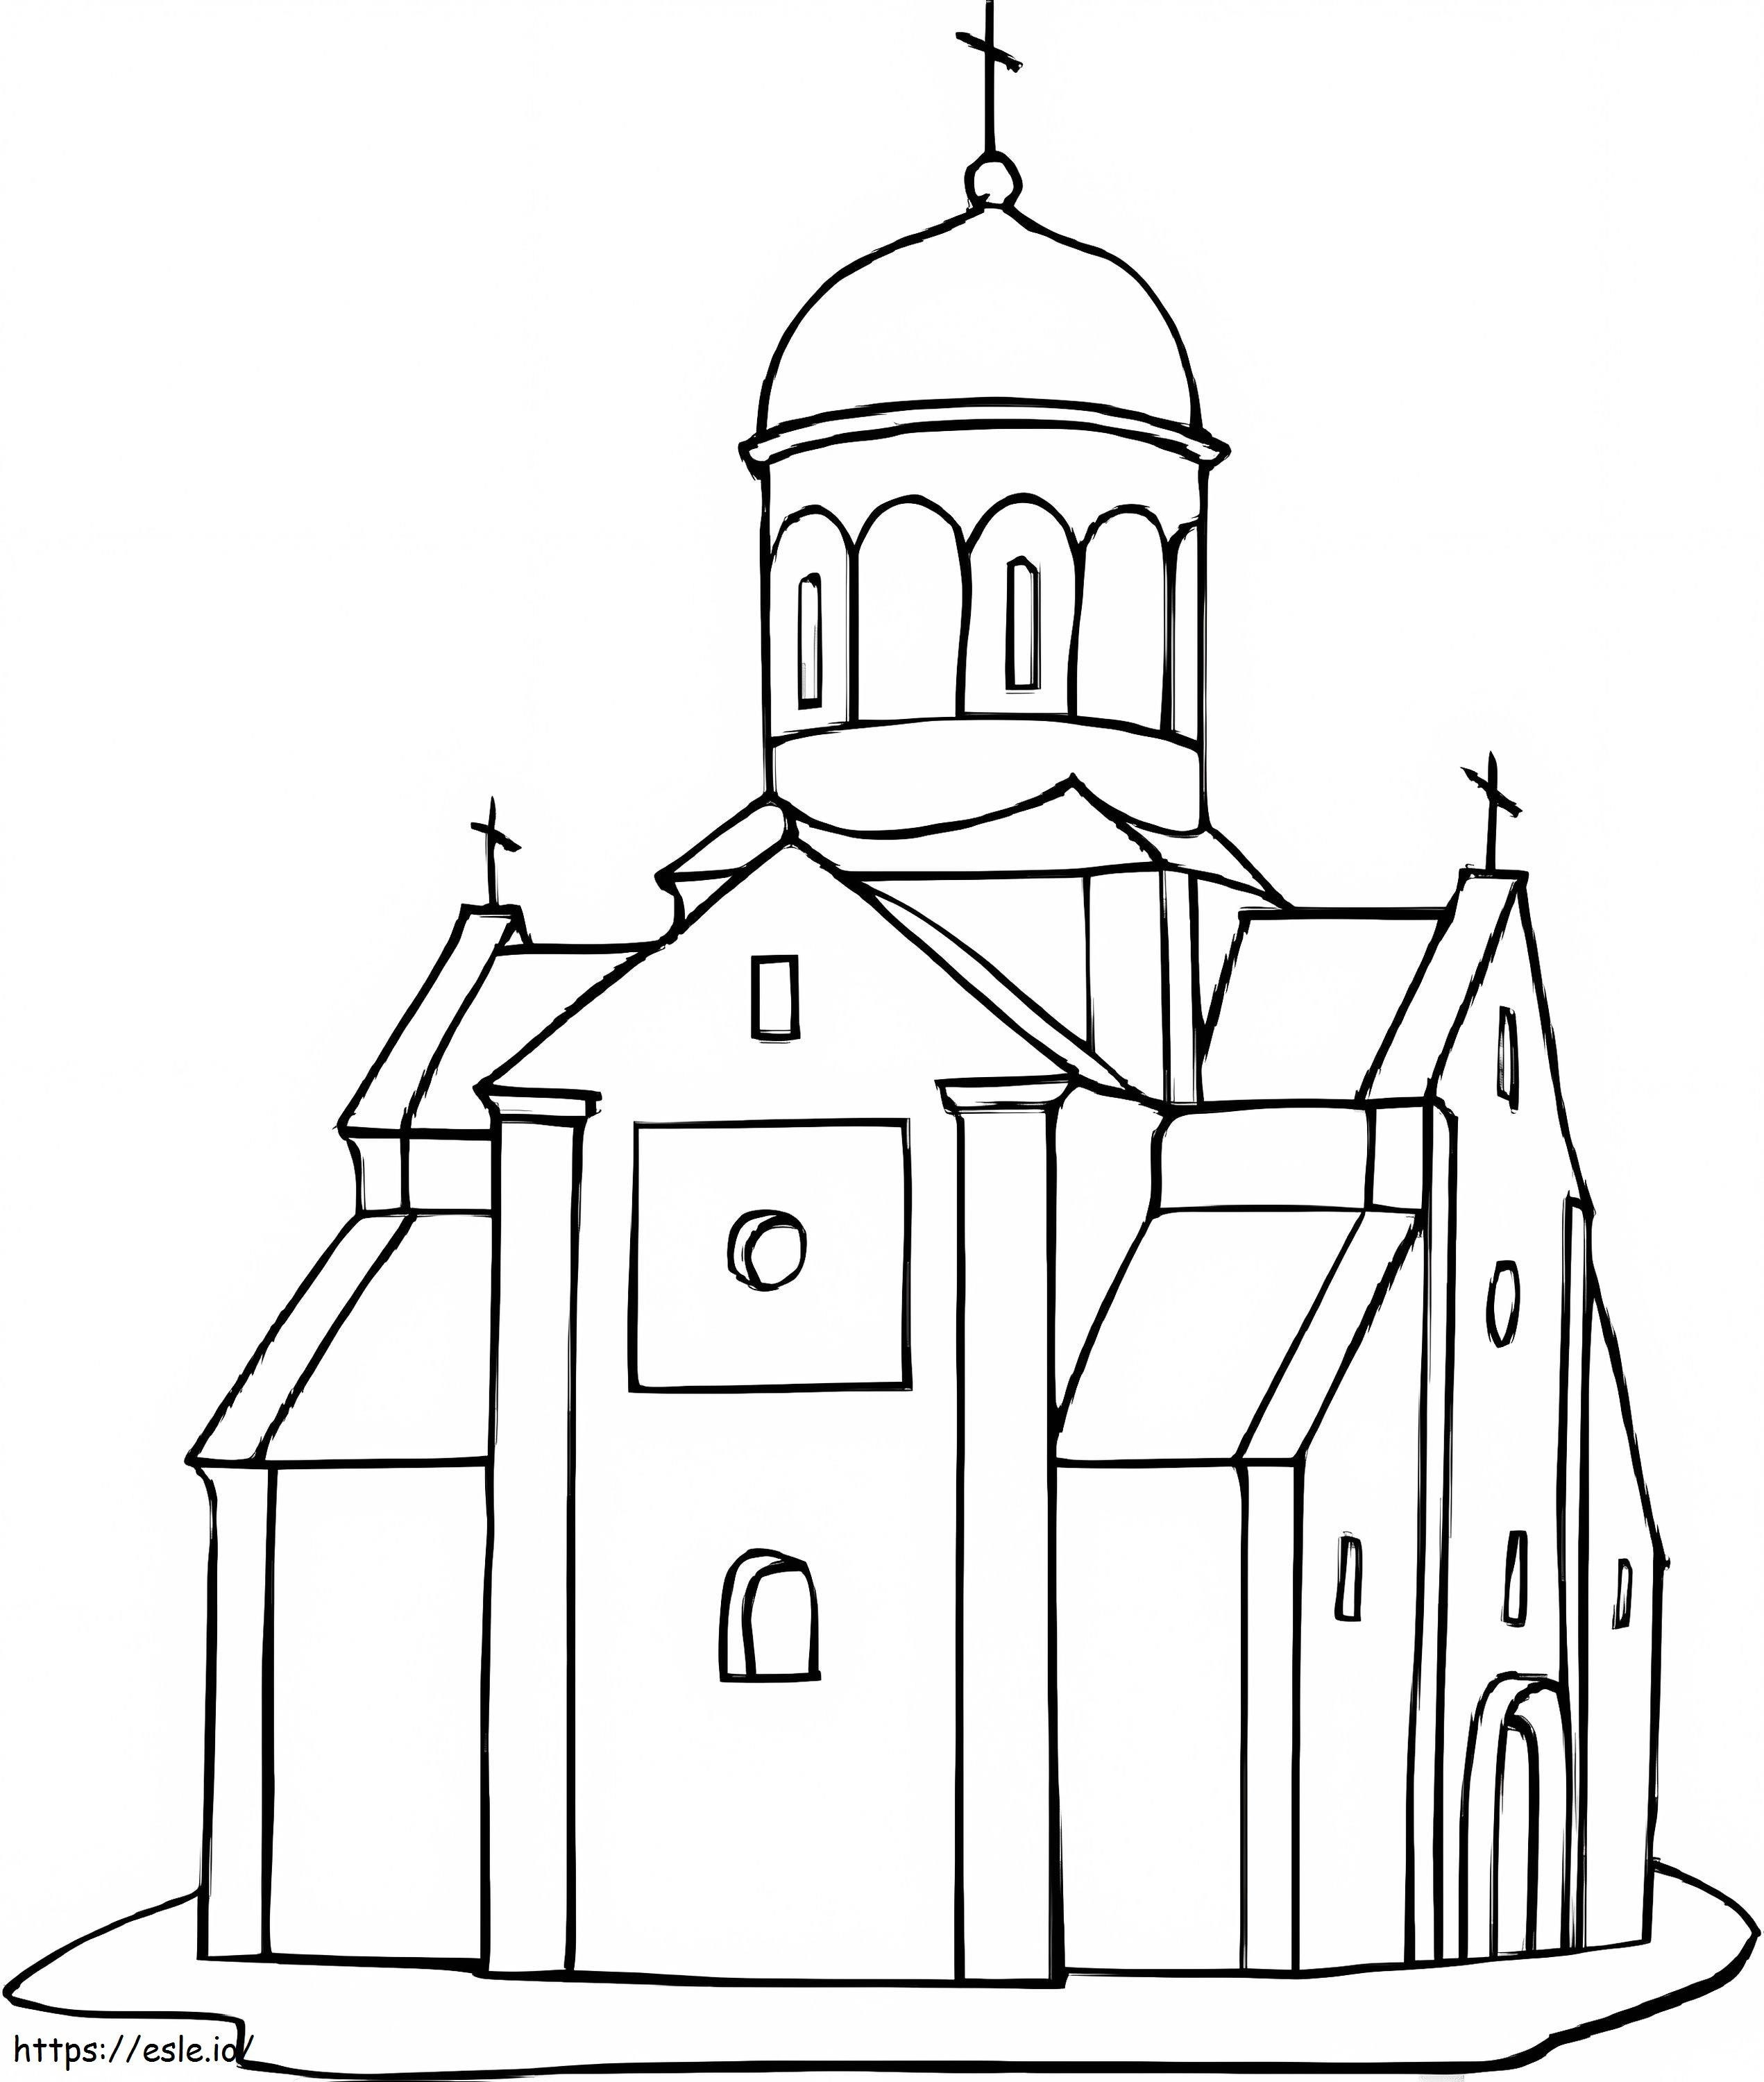 Printable Church coloring page